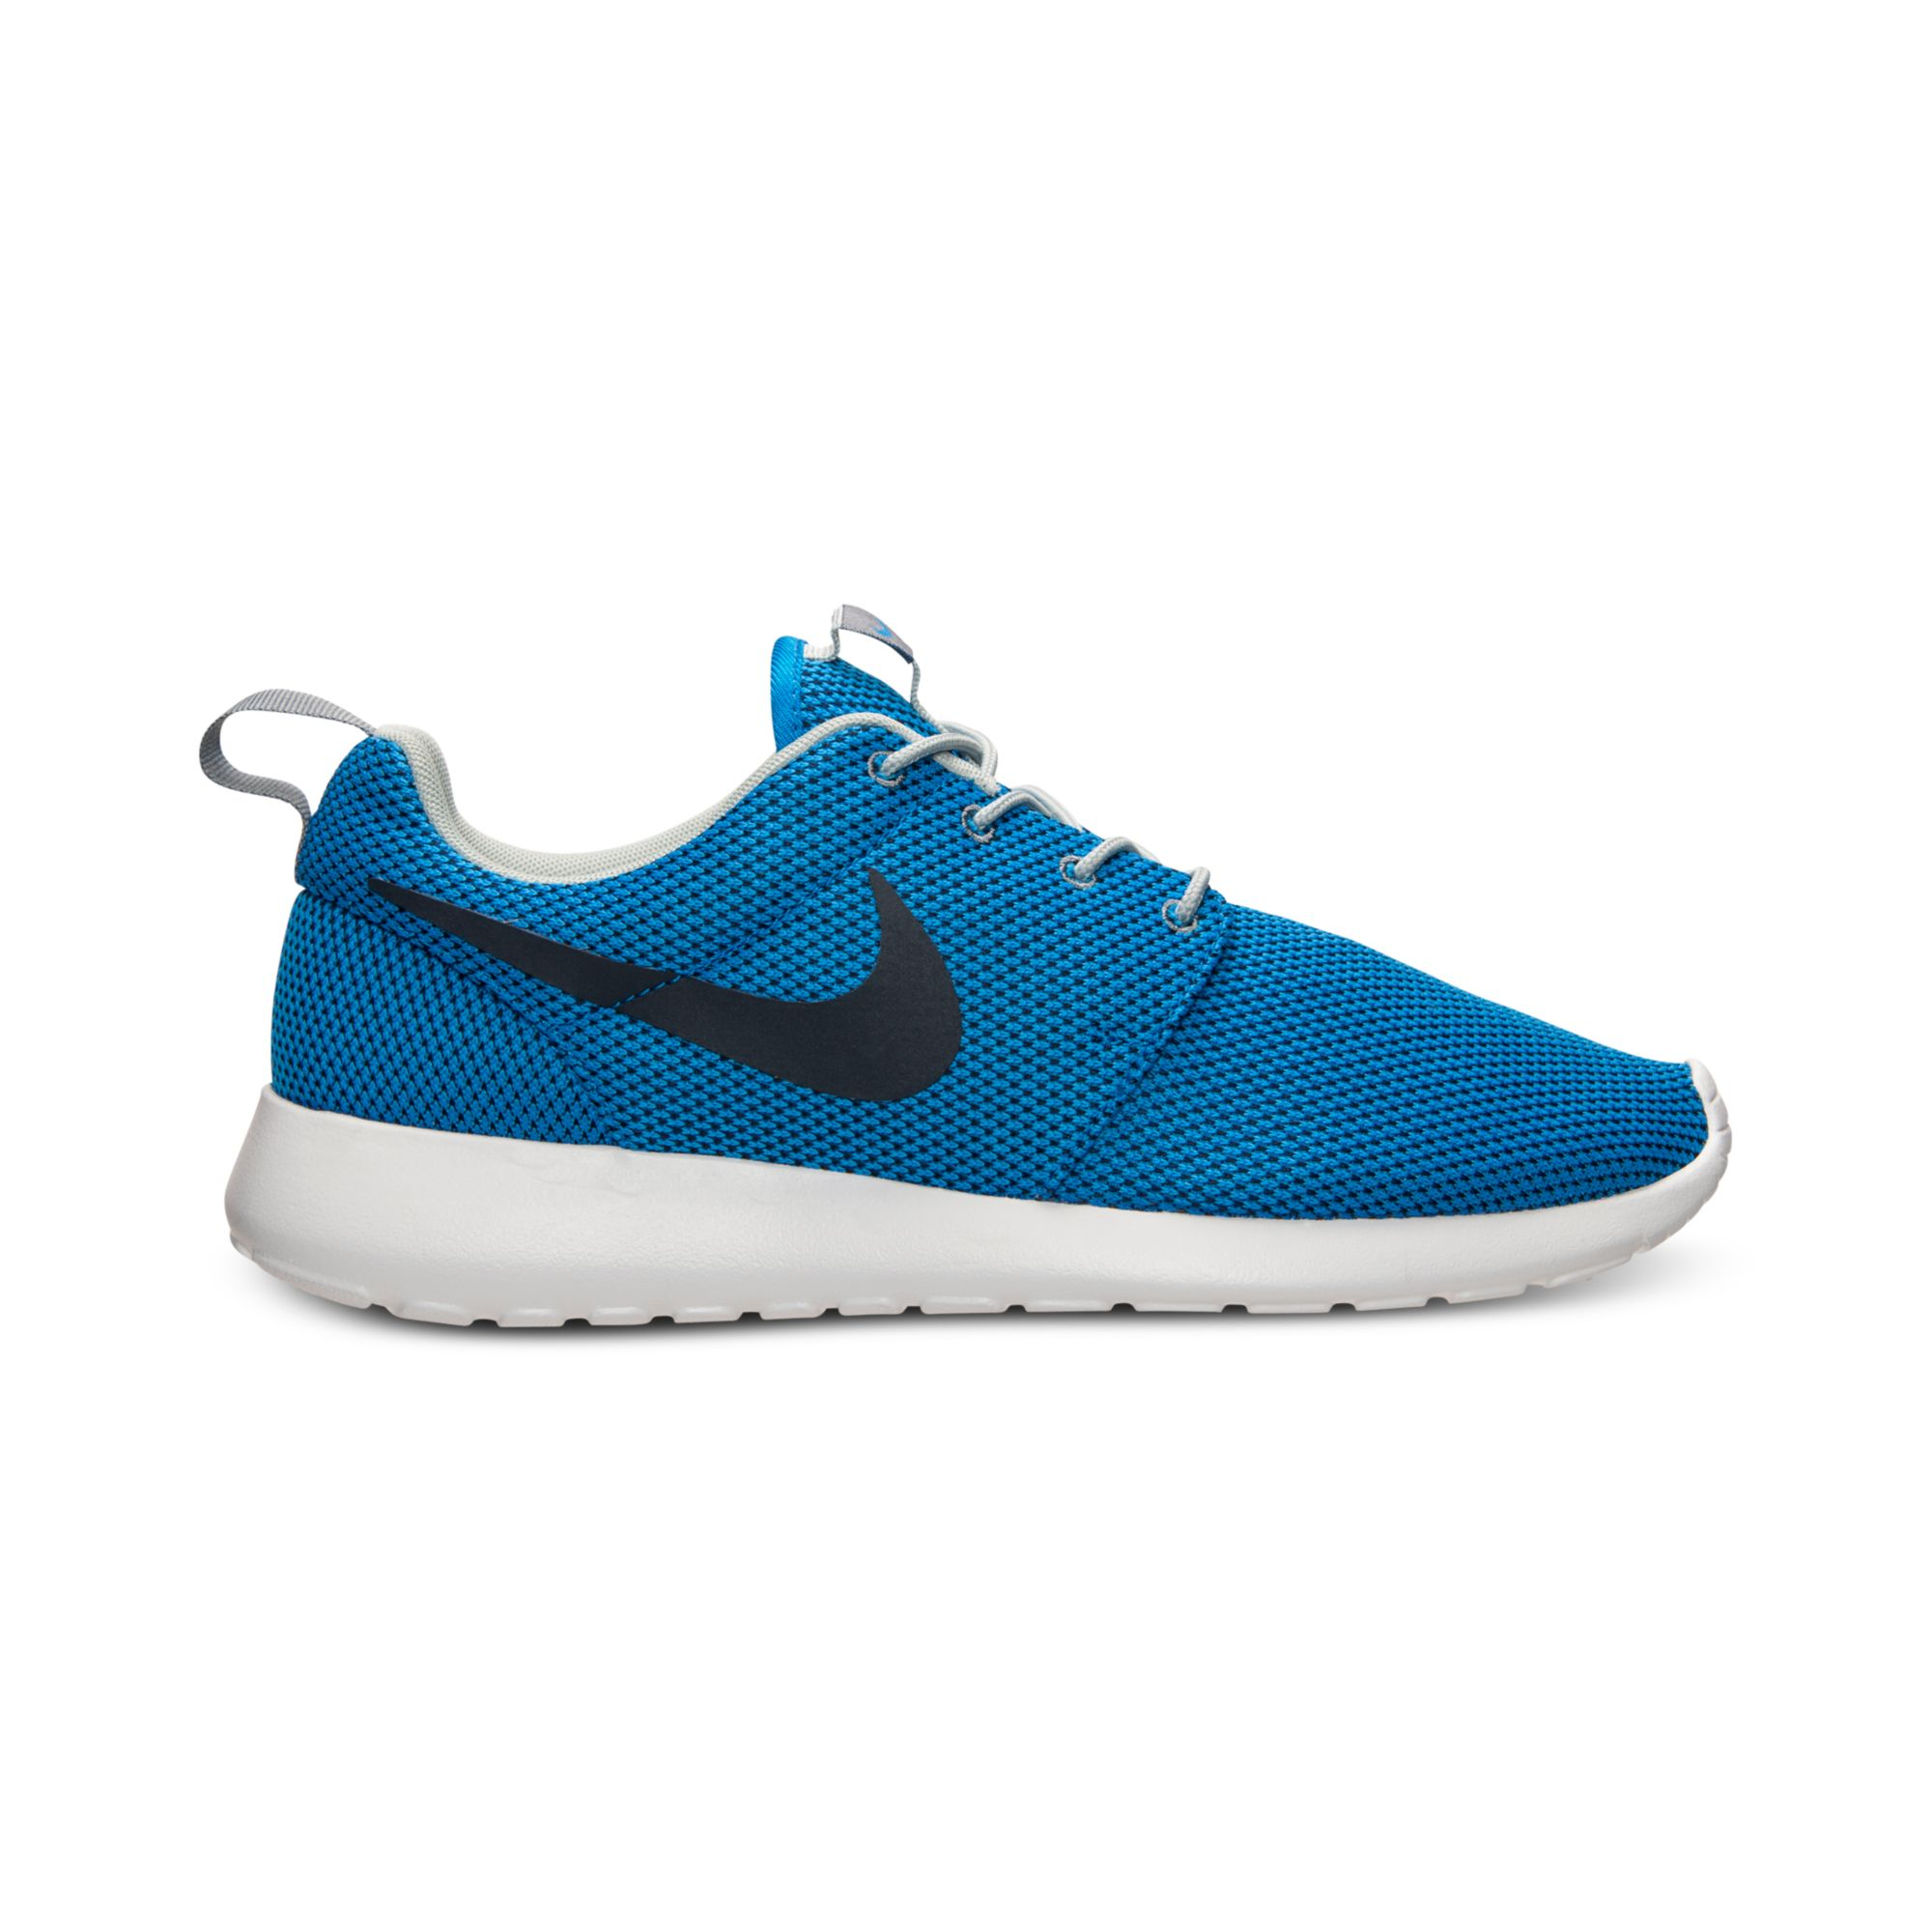 Lyst - Nike Mens Roshe Run Casual Sneakers From Finish Line in Blue for Men